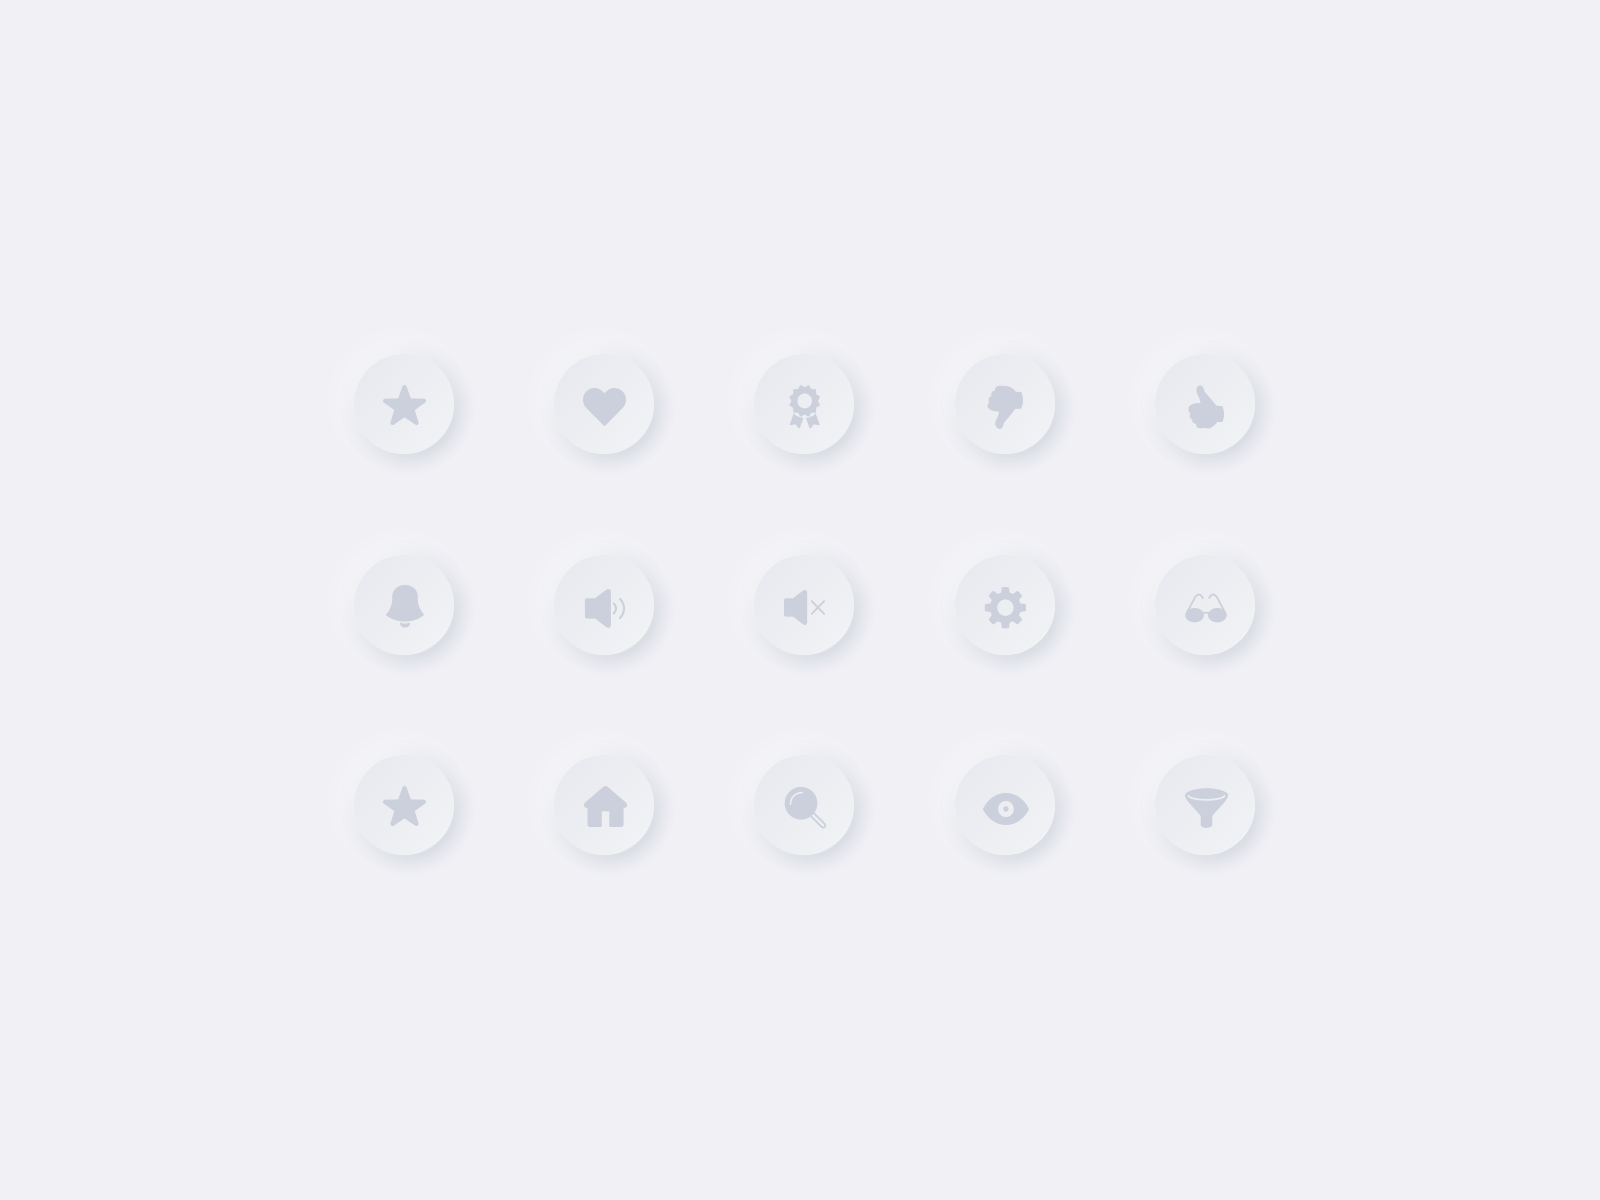 Neumorphism Buttons 2020 design trend buttons icons neumorphism skeumorphism soft ui soft ui icons ui designs ui trend